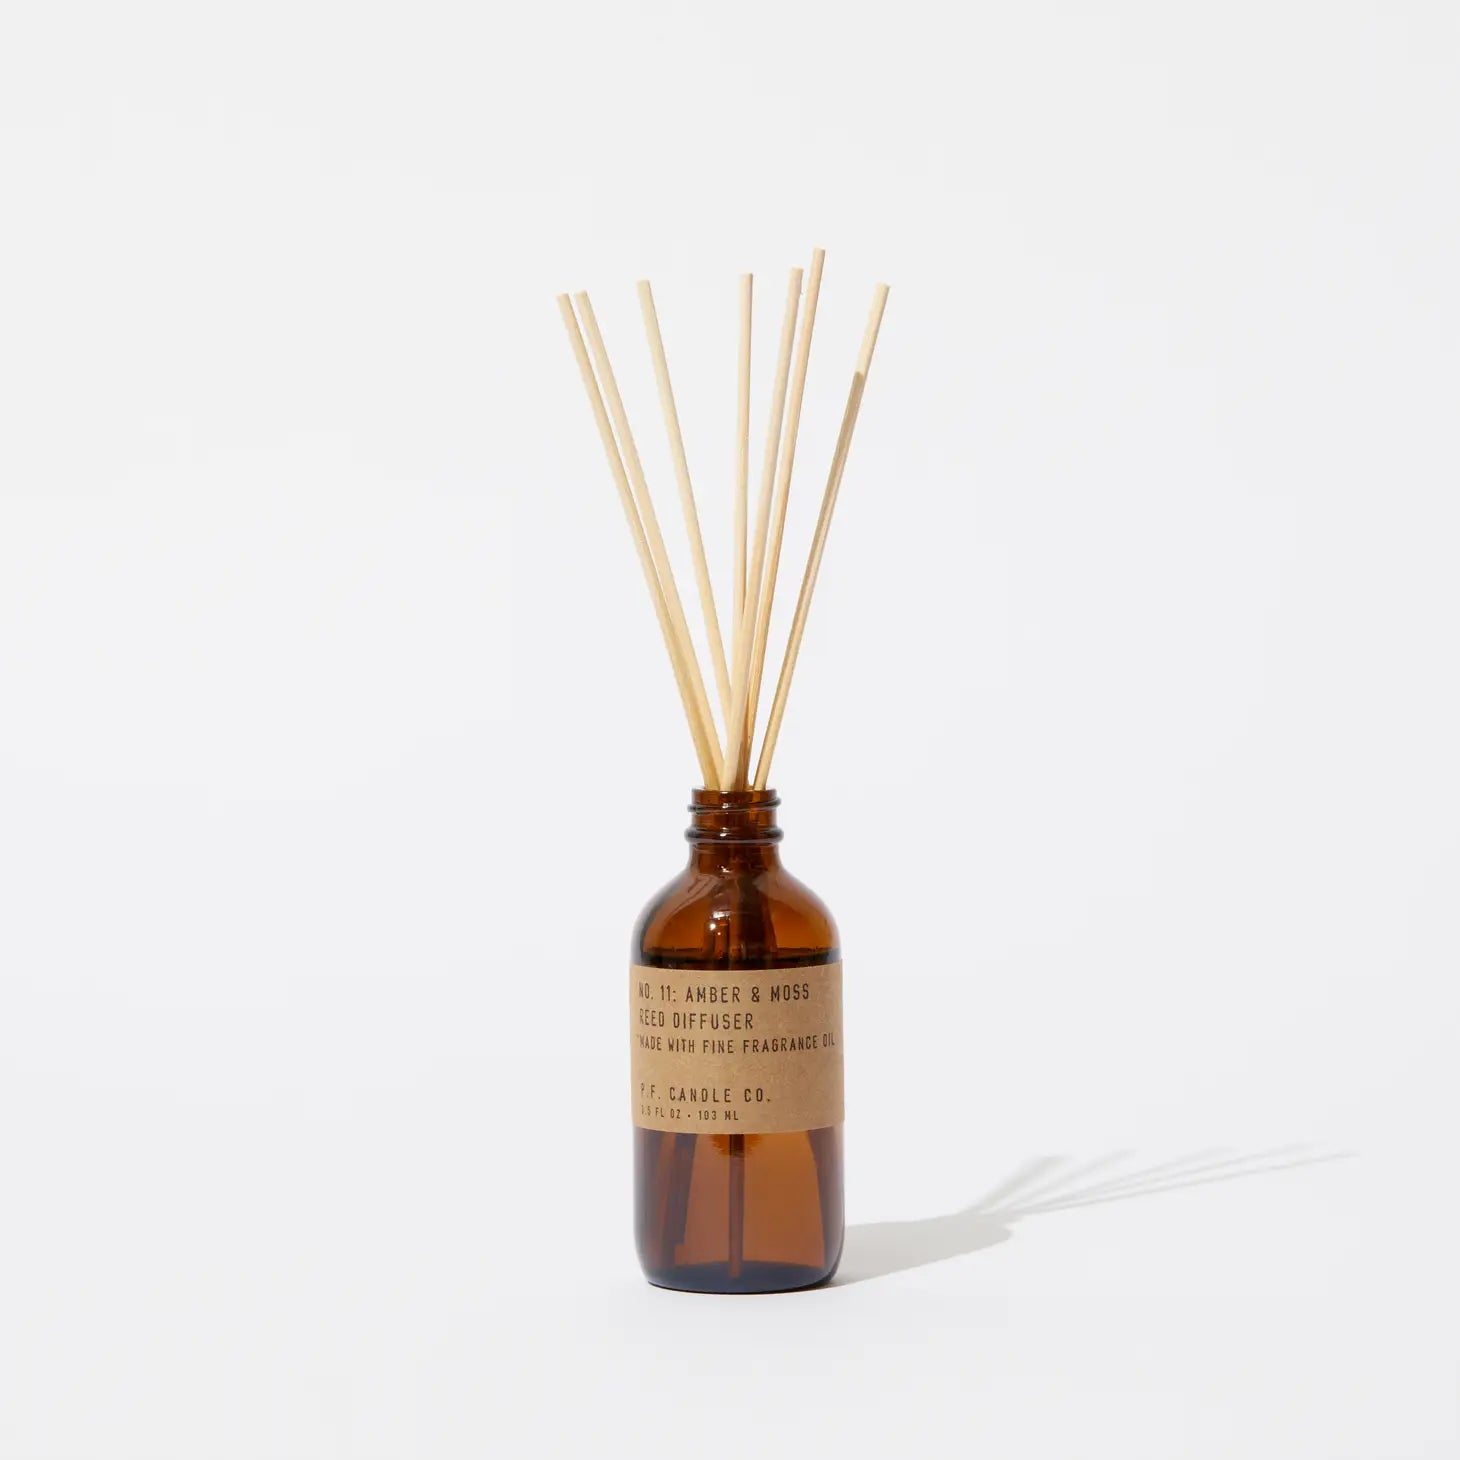 P.F. Candle - Amber & Moss Diffuser